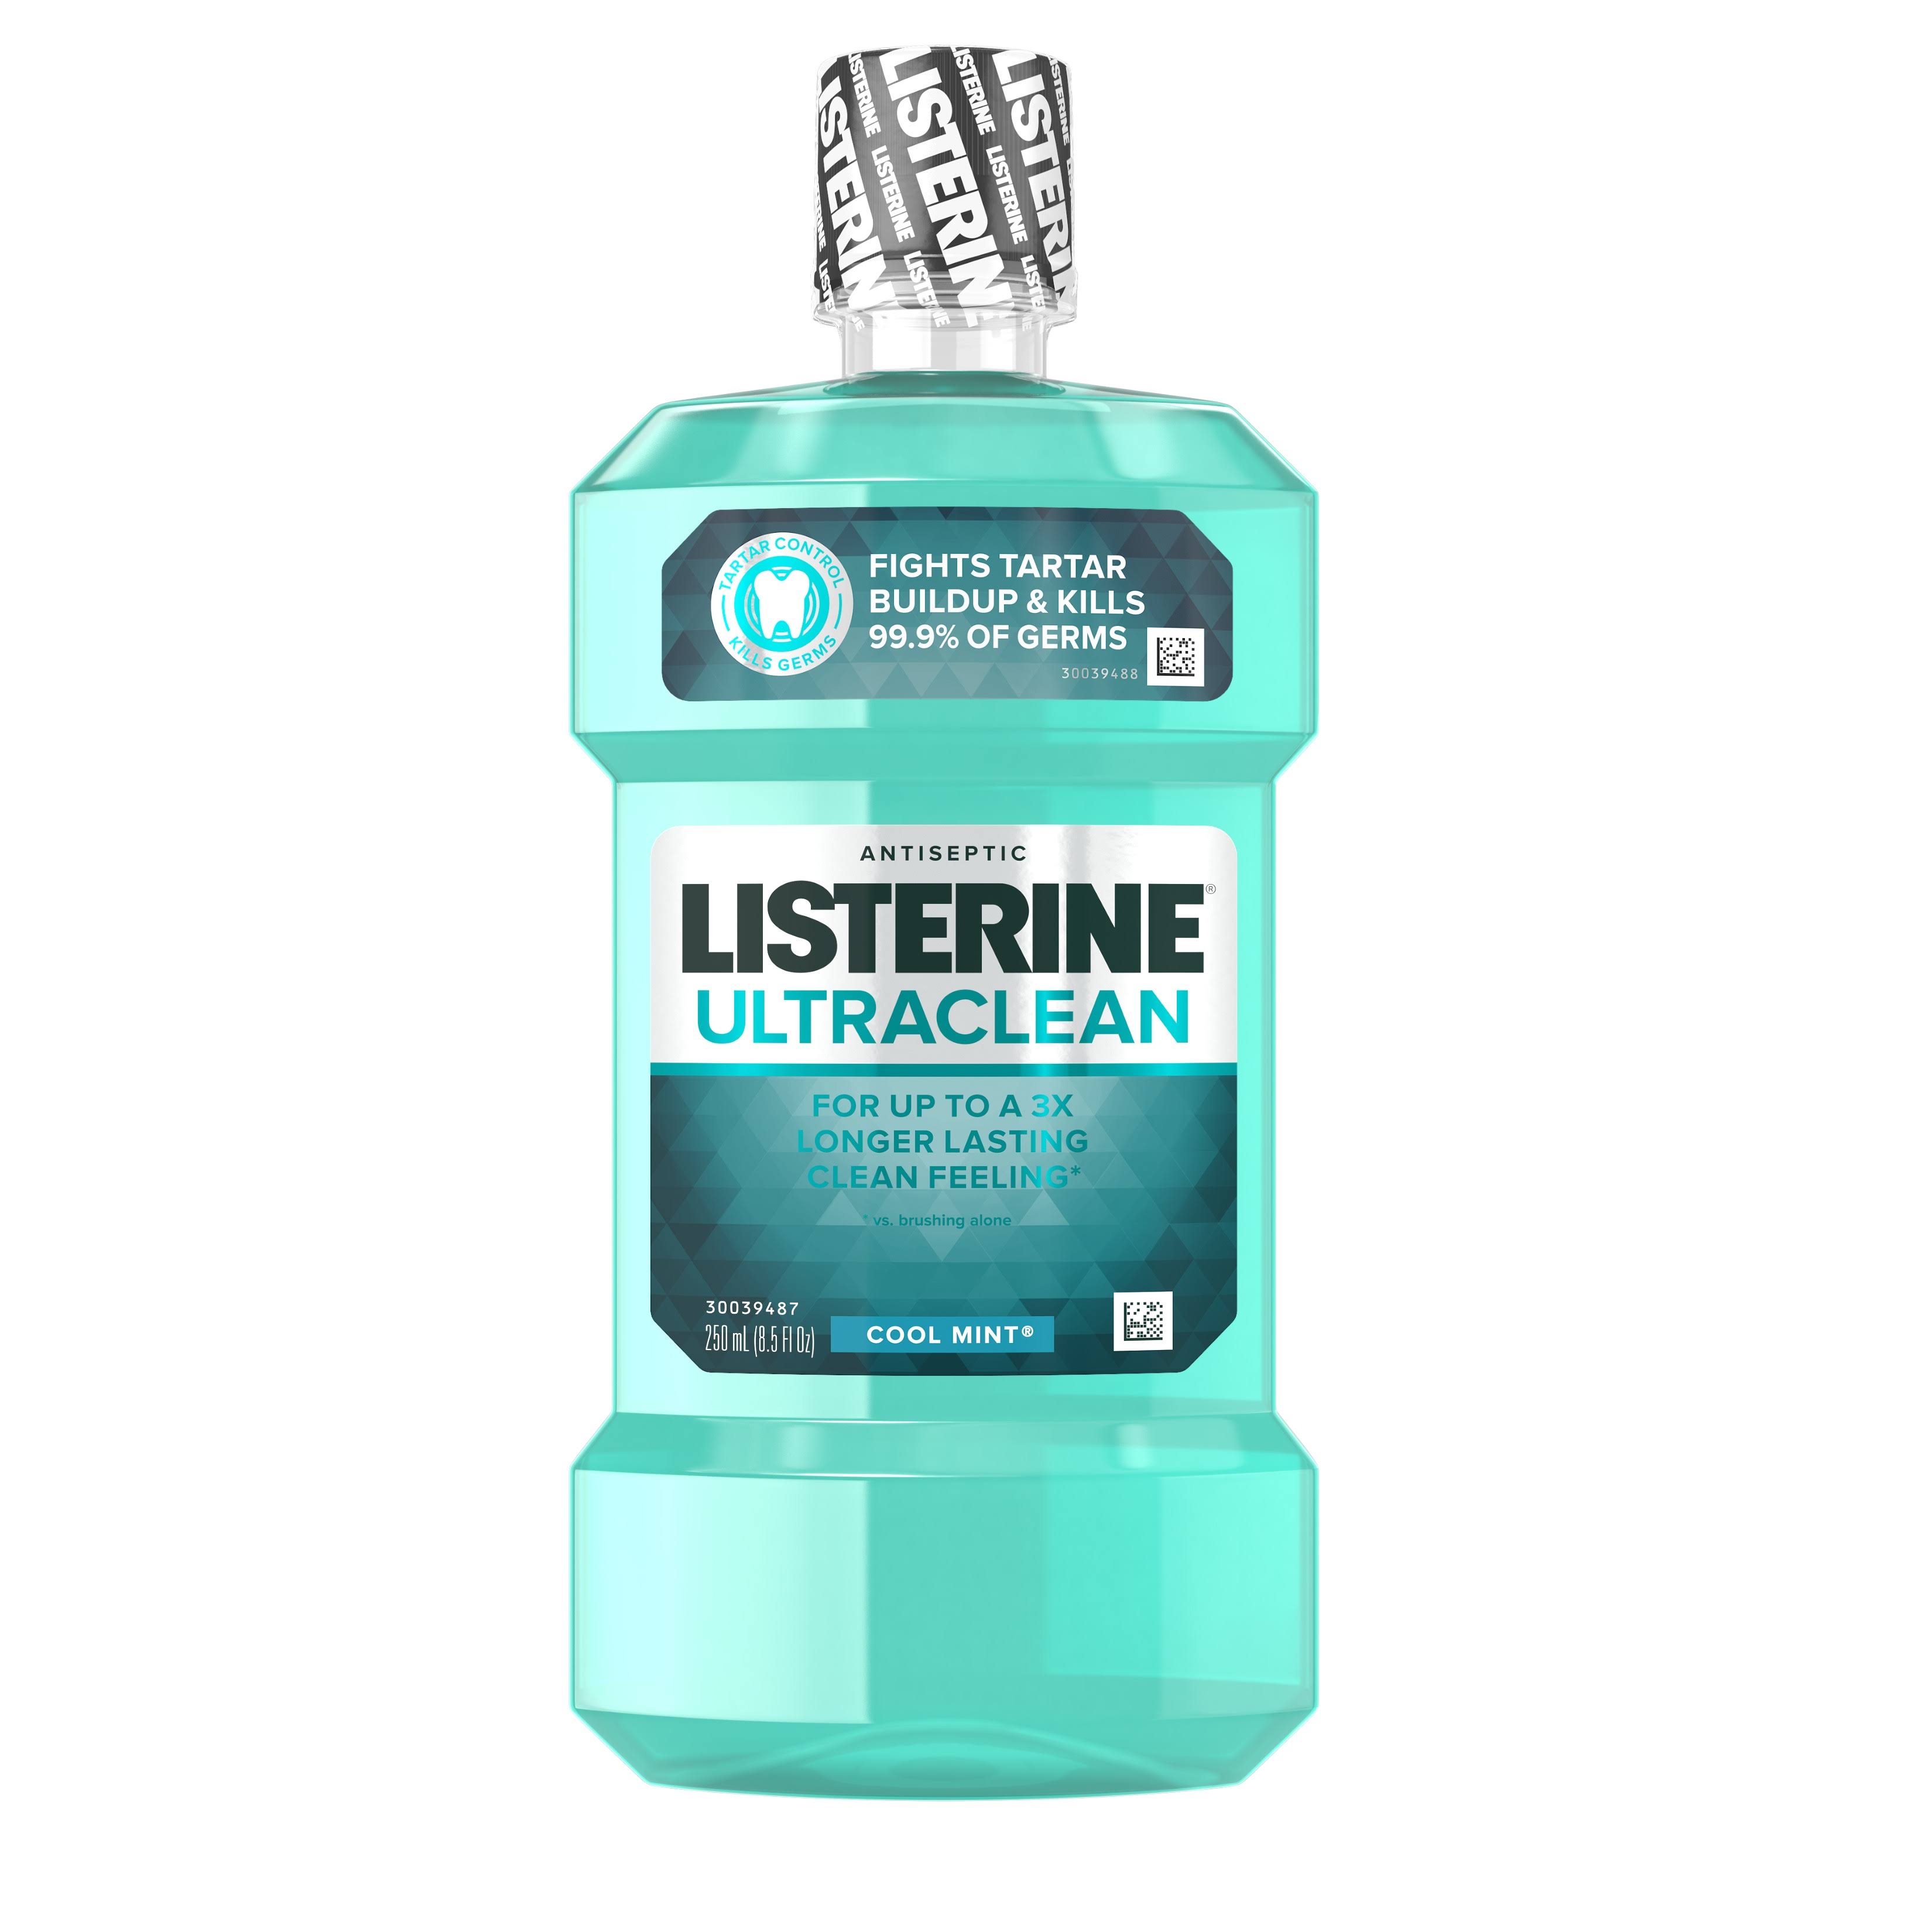 Listerine Ultra Clean Antiseptic Mouthwash - Cool Mint, 250ml